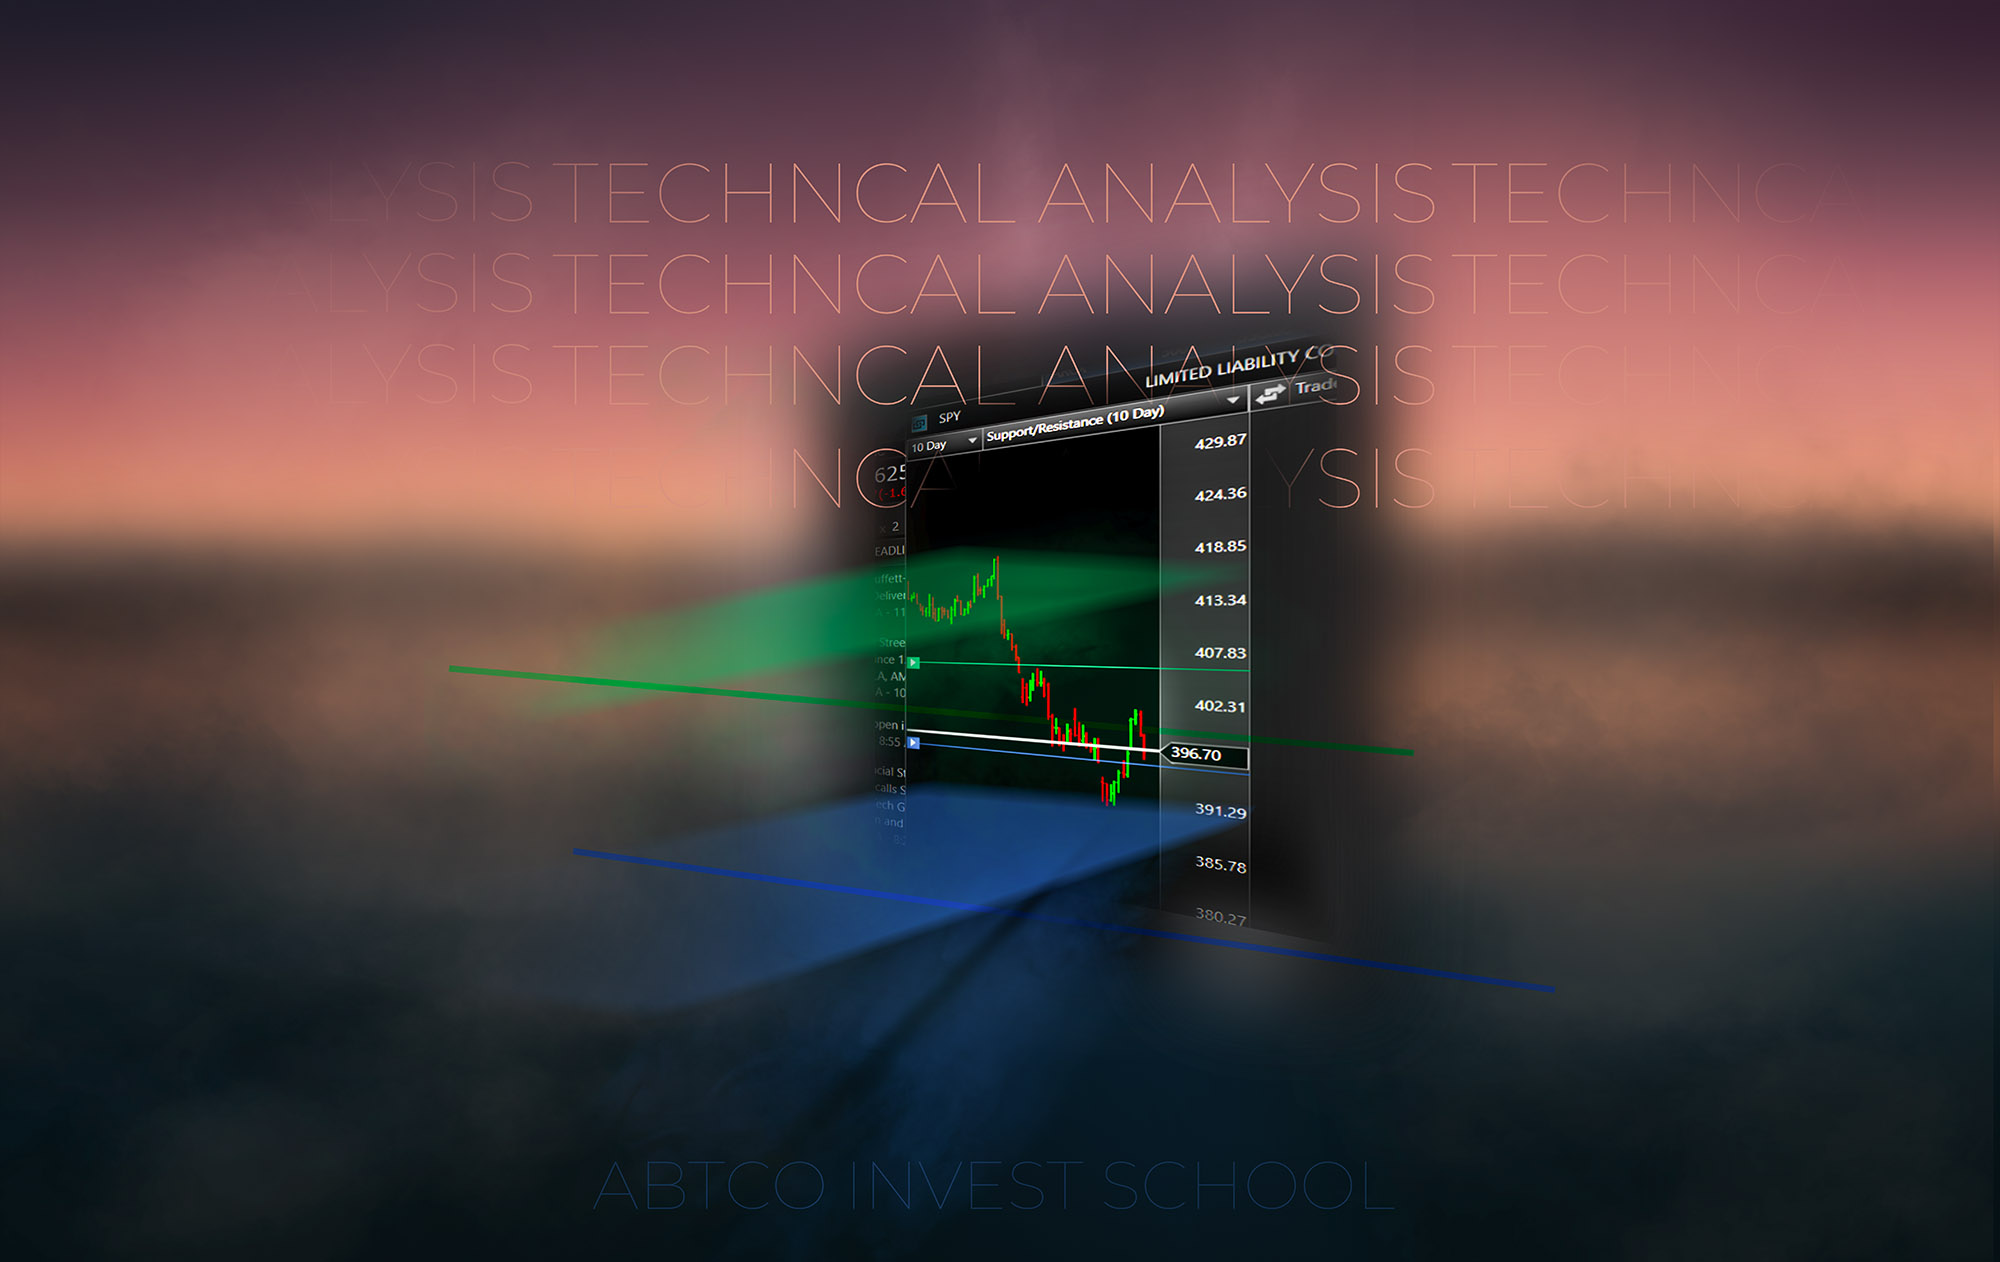 An illustration of technical analysis